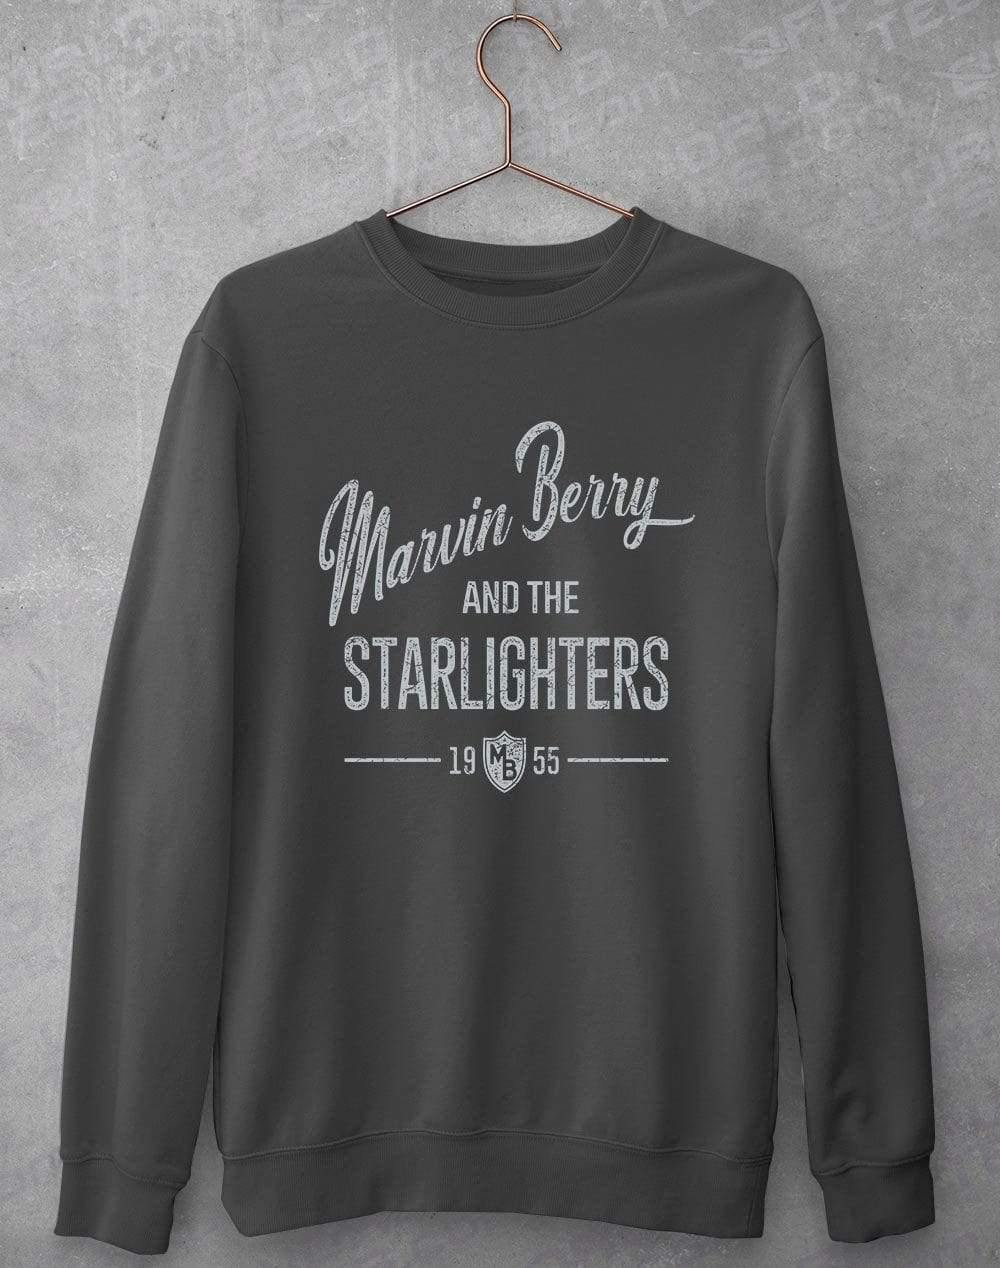 Marvin Berry and the Starlighters Sweatshirt S / Charcoal  - Off World Tees